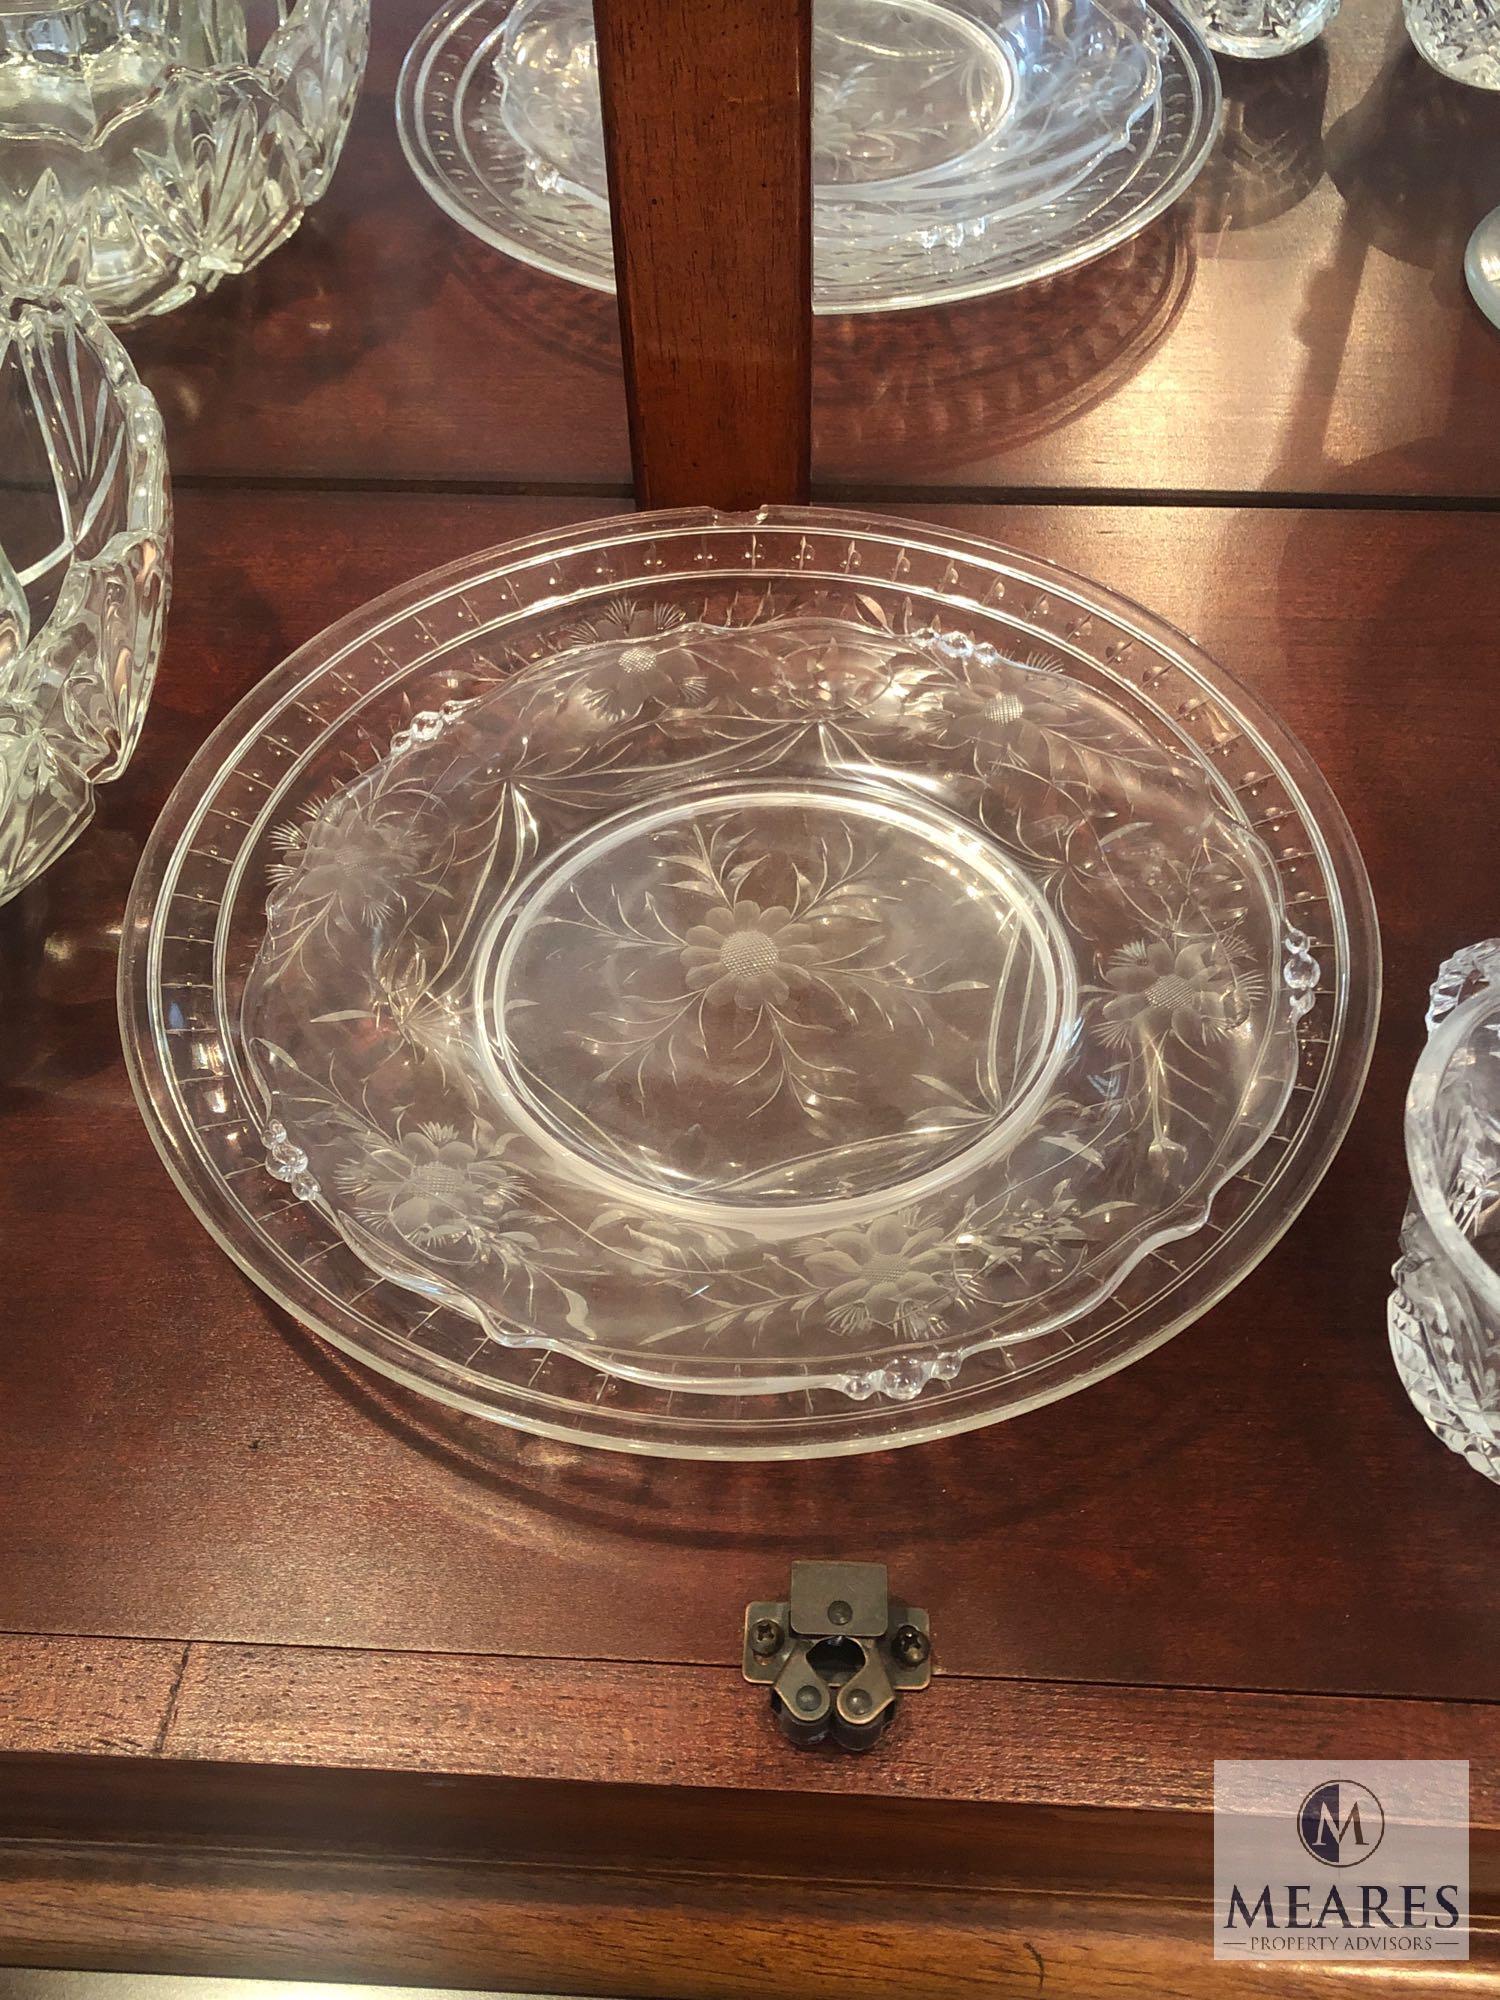 Contents of Hutch - Assorted Crystal, Silver Plated, and Glass Serving Items & Vases